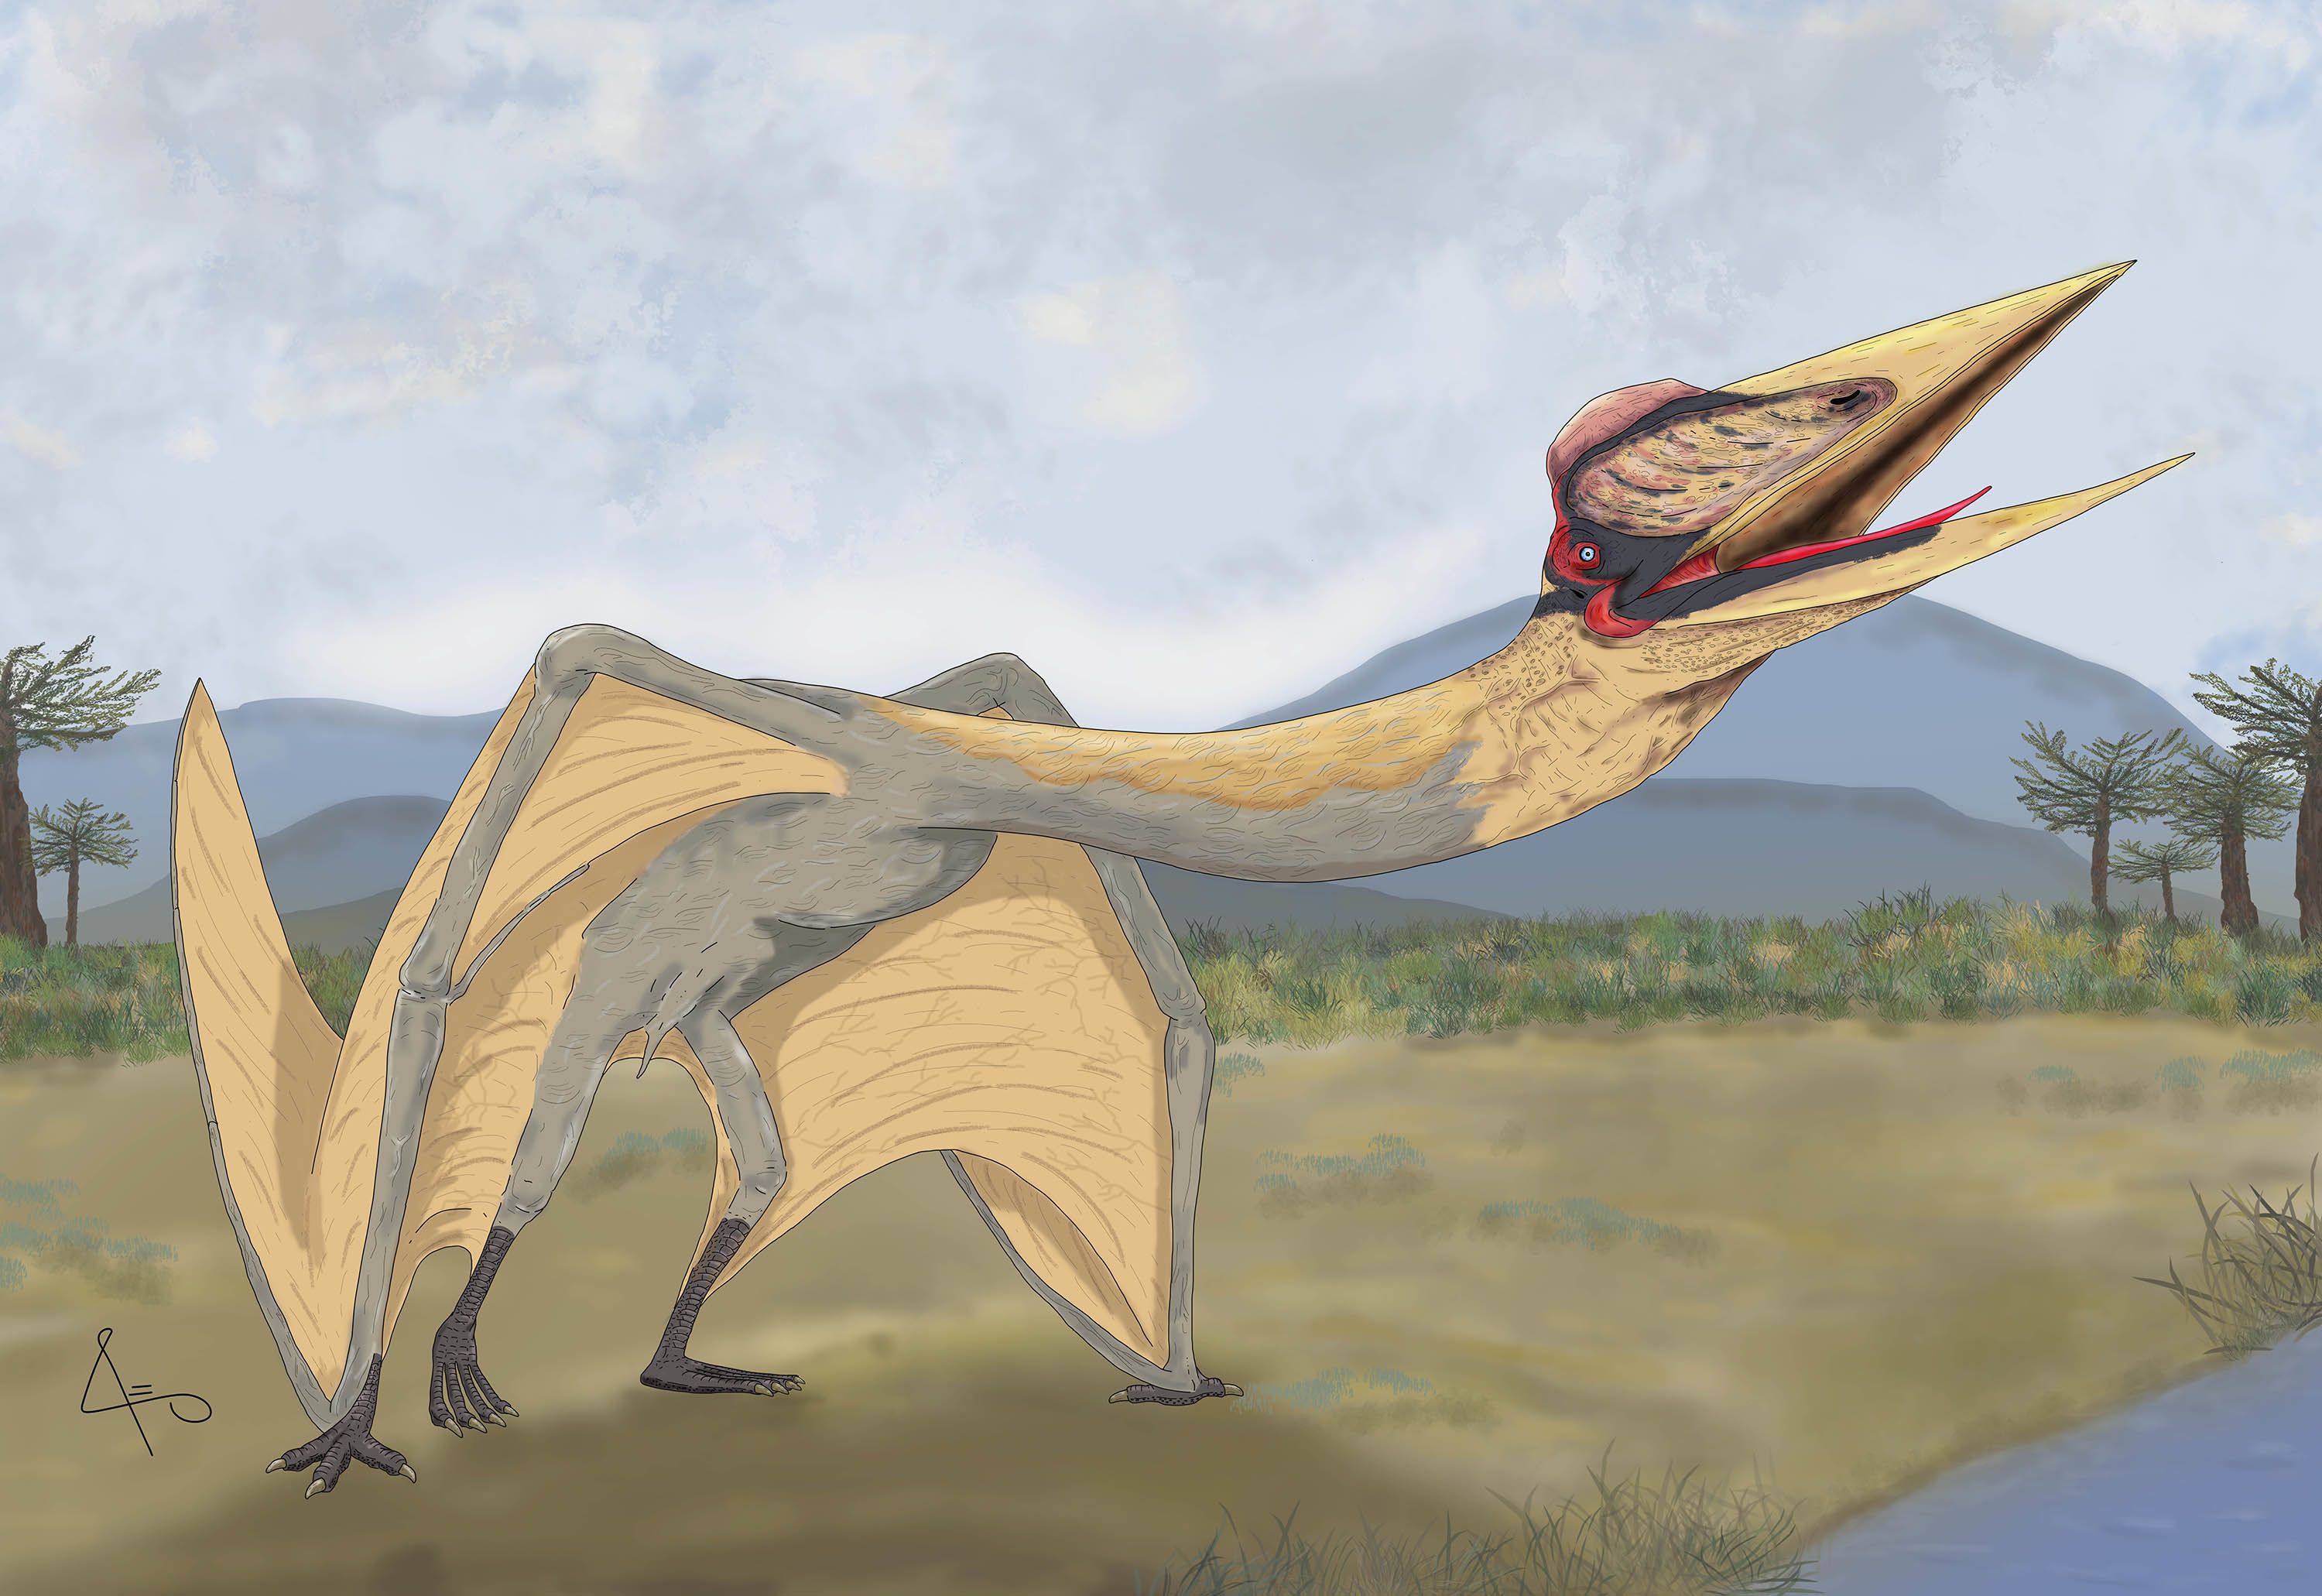 Pterodactyl Pictures & Facts - The Dinosaur Database